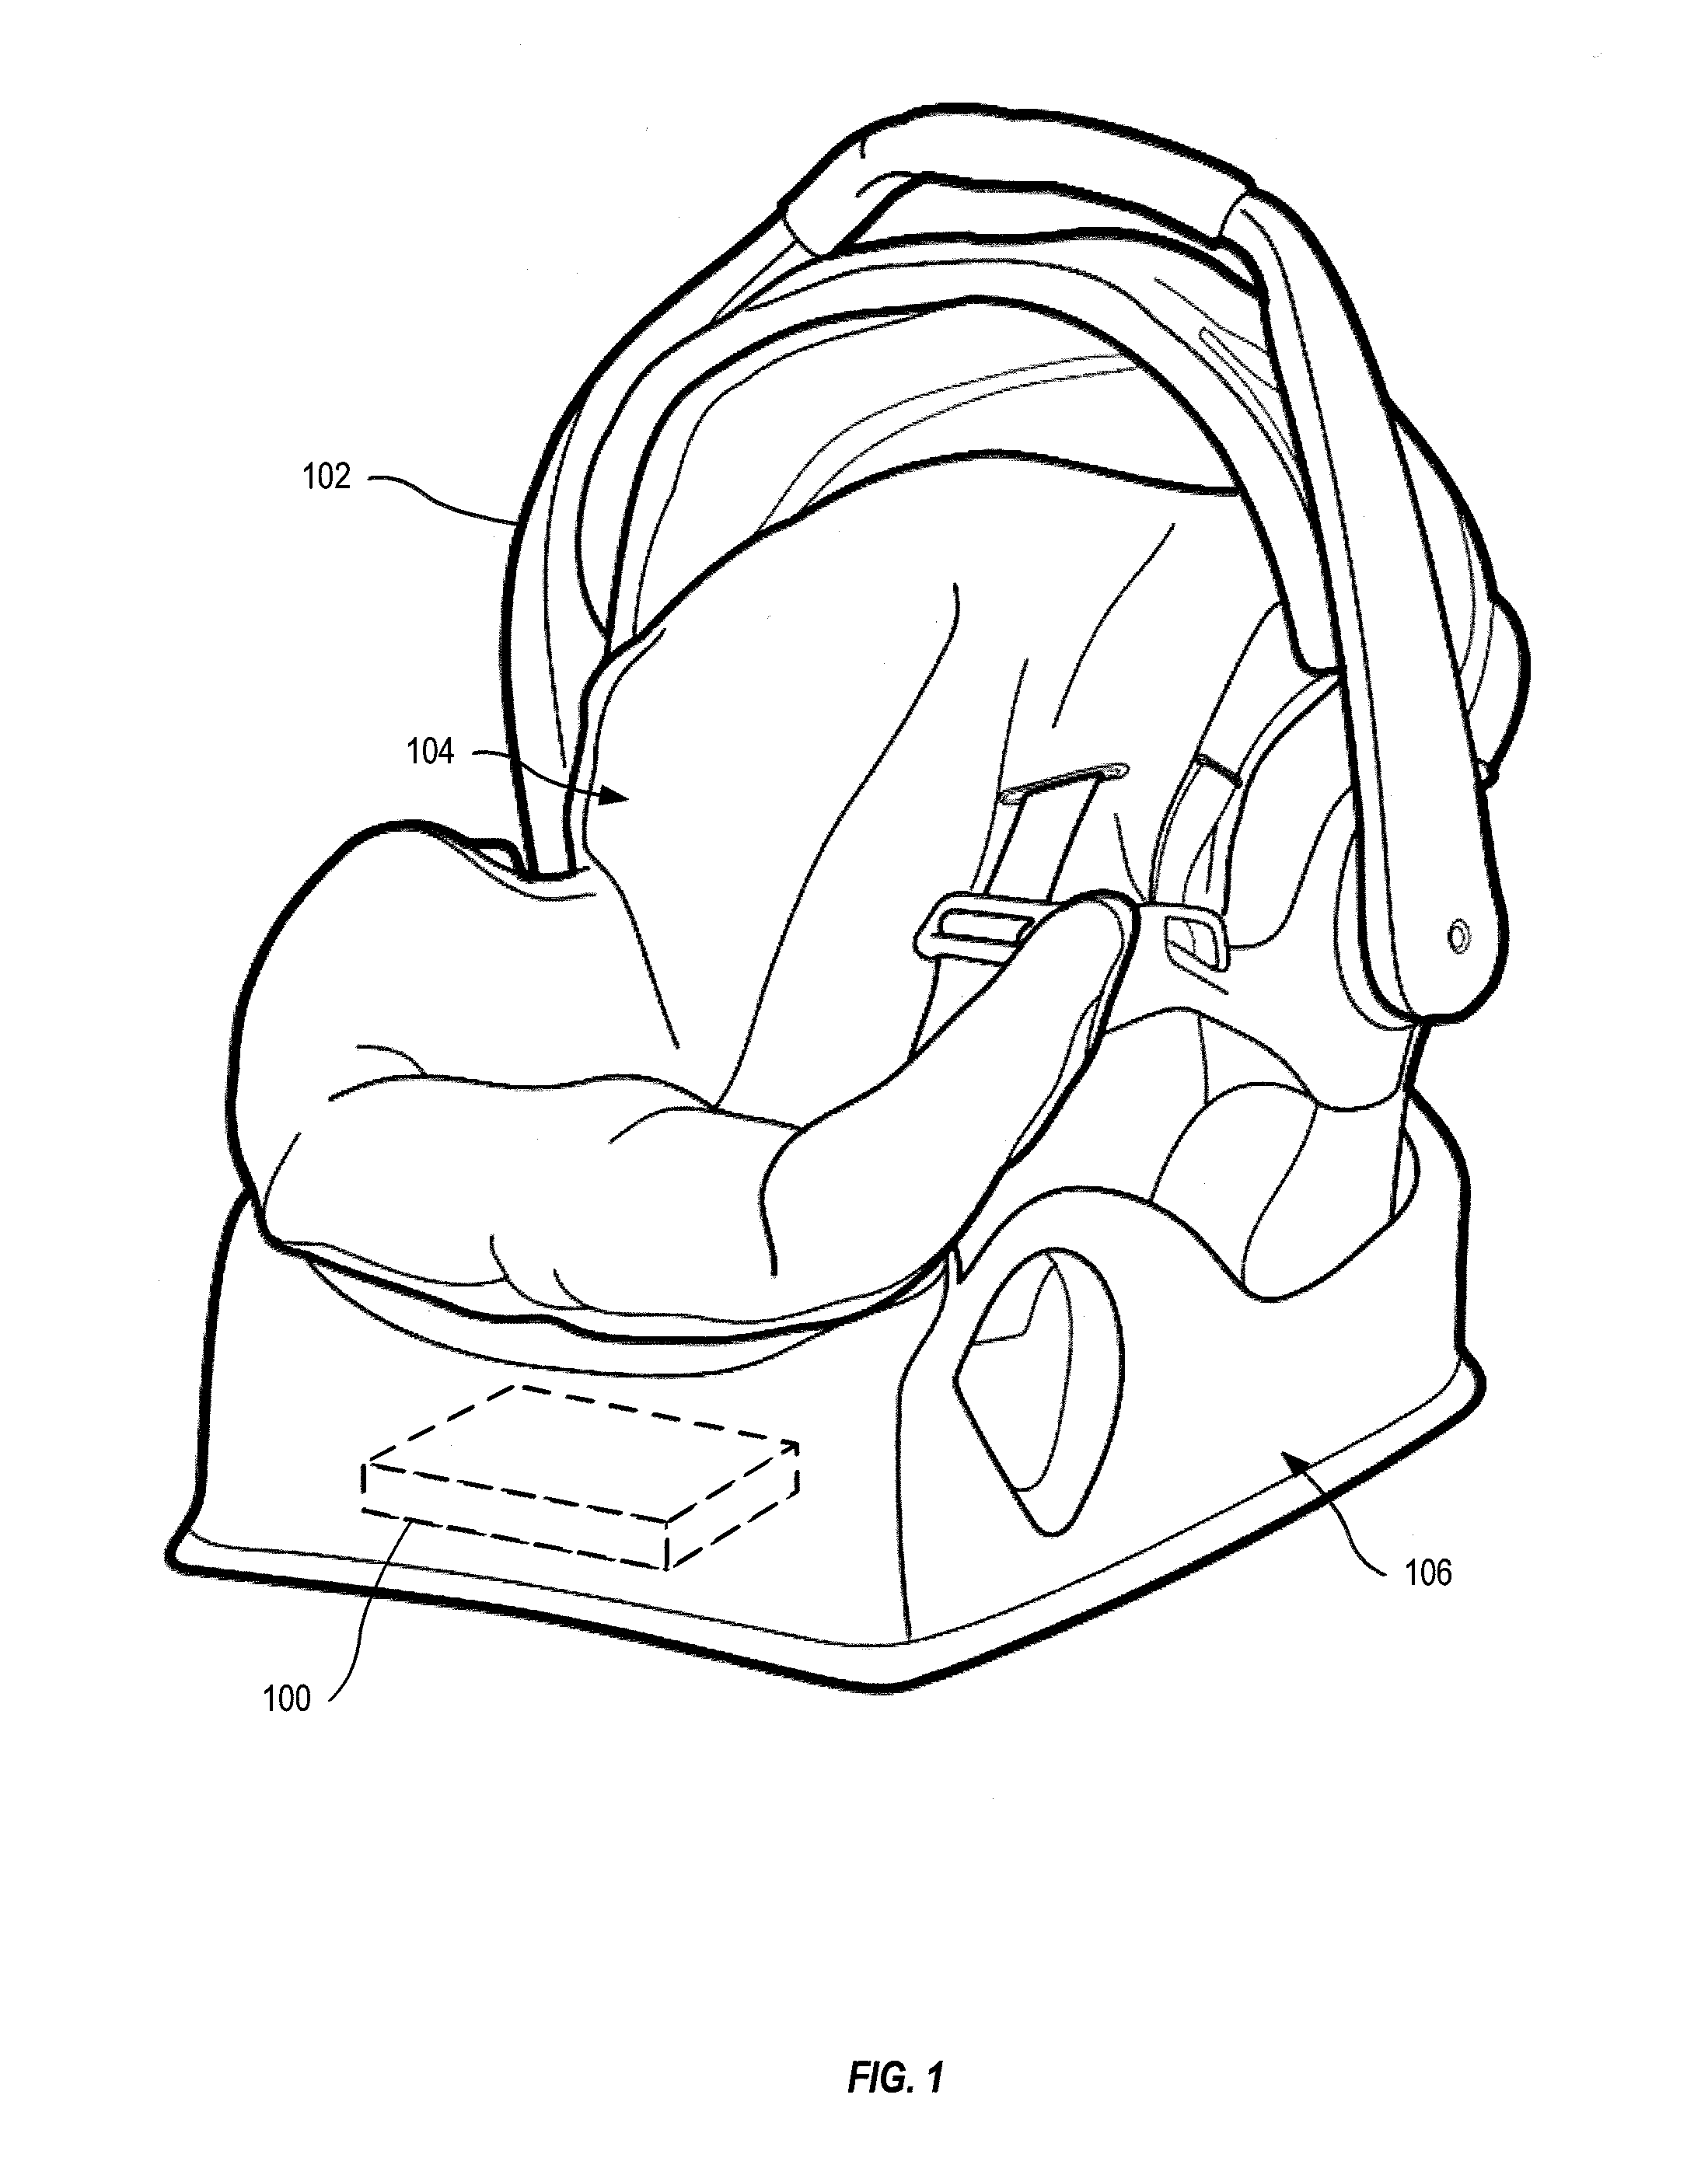 Systems for Soothing and Prolonging Sleep of a Child in a Car Seat